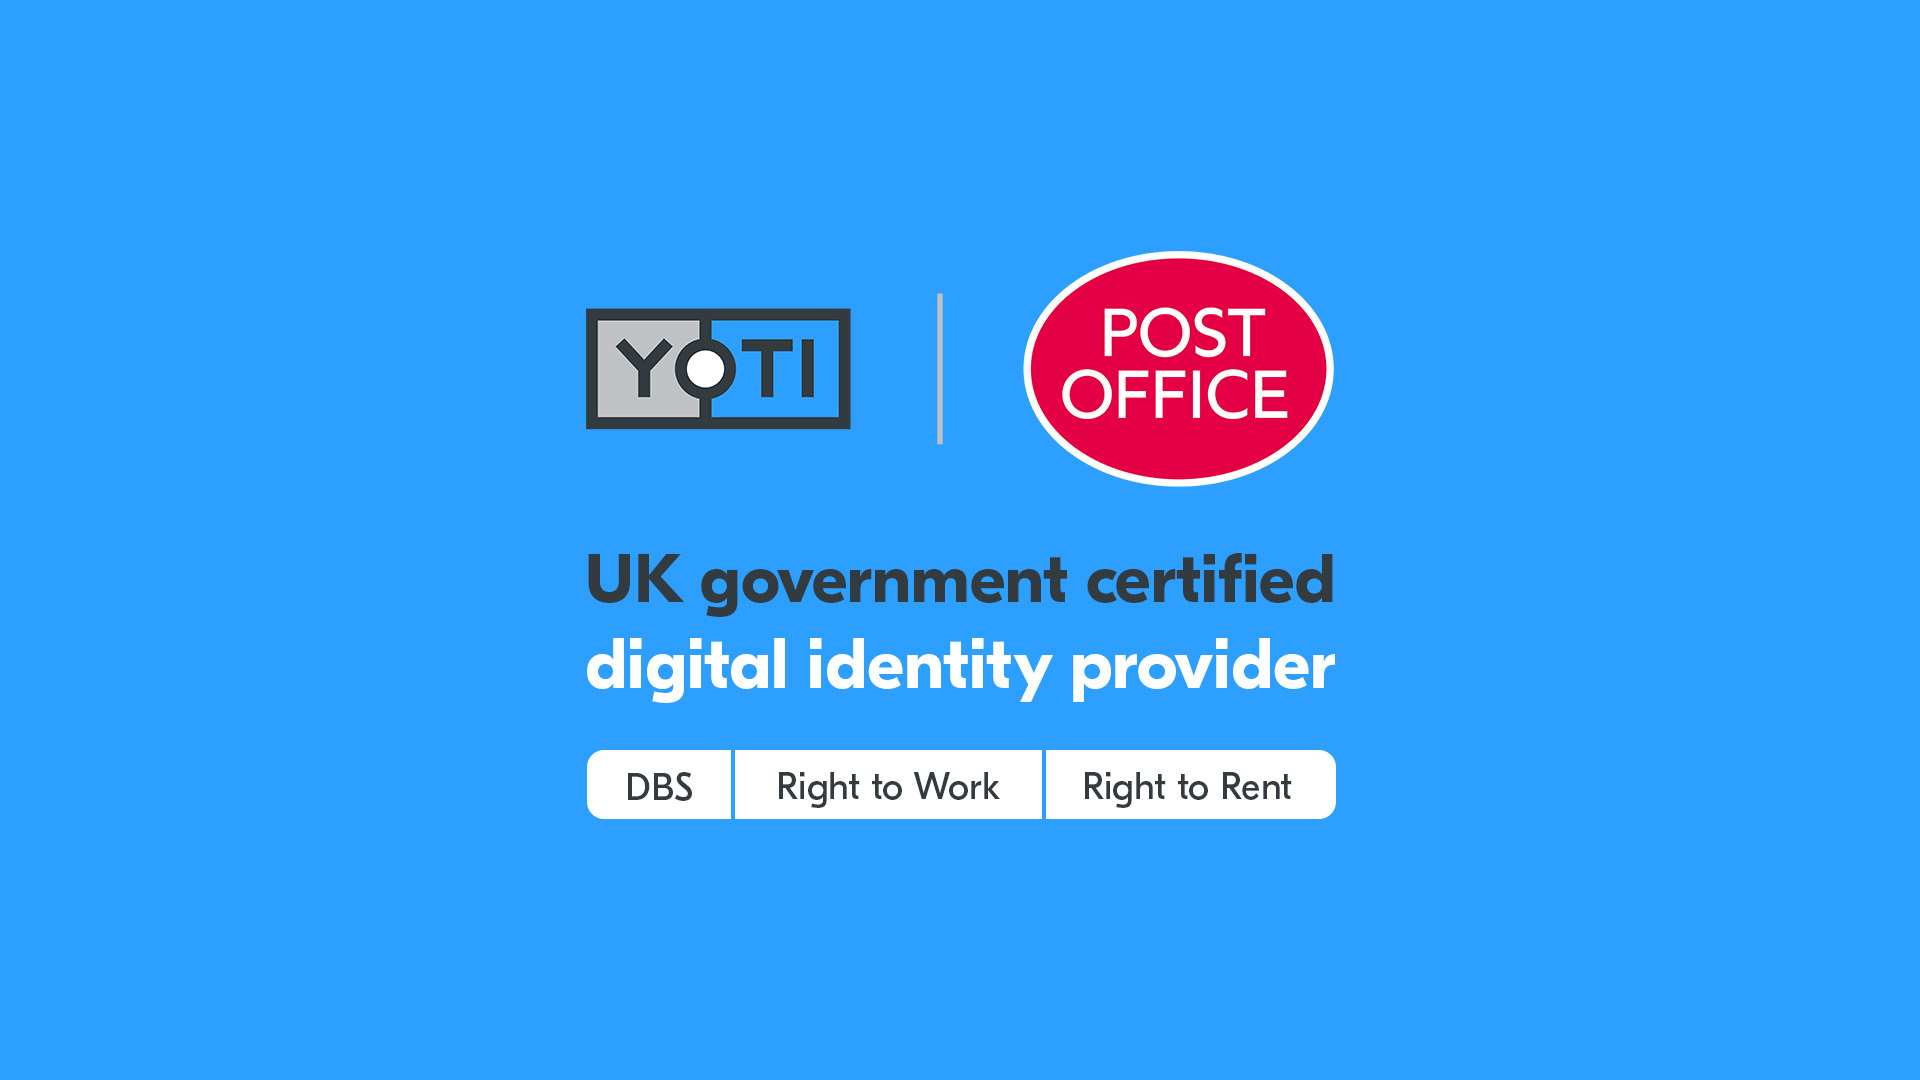 Yoti and Post Office gain UK government approval as certified identity provider for DBS, Right to Work and Right to Rent checks